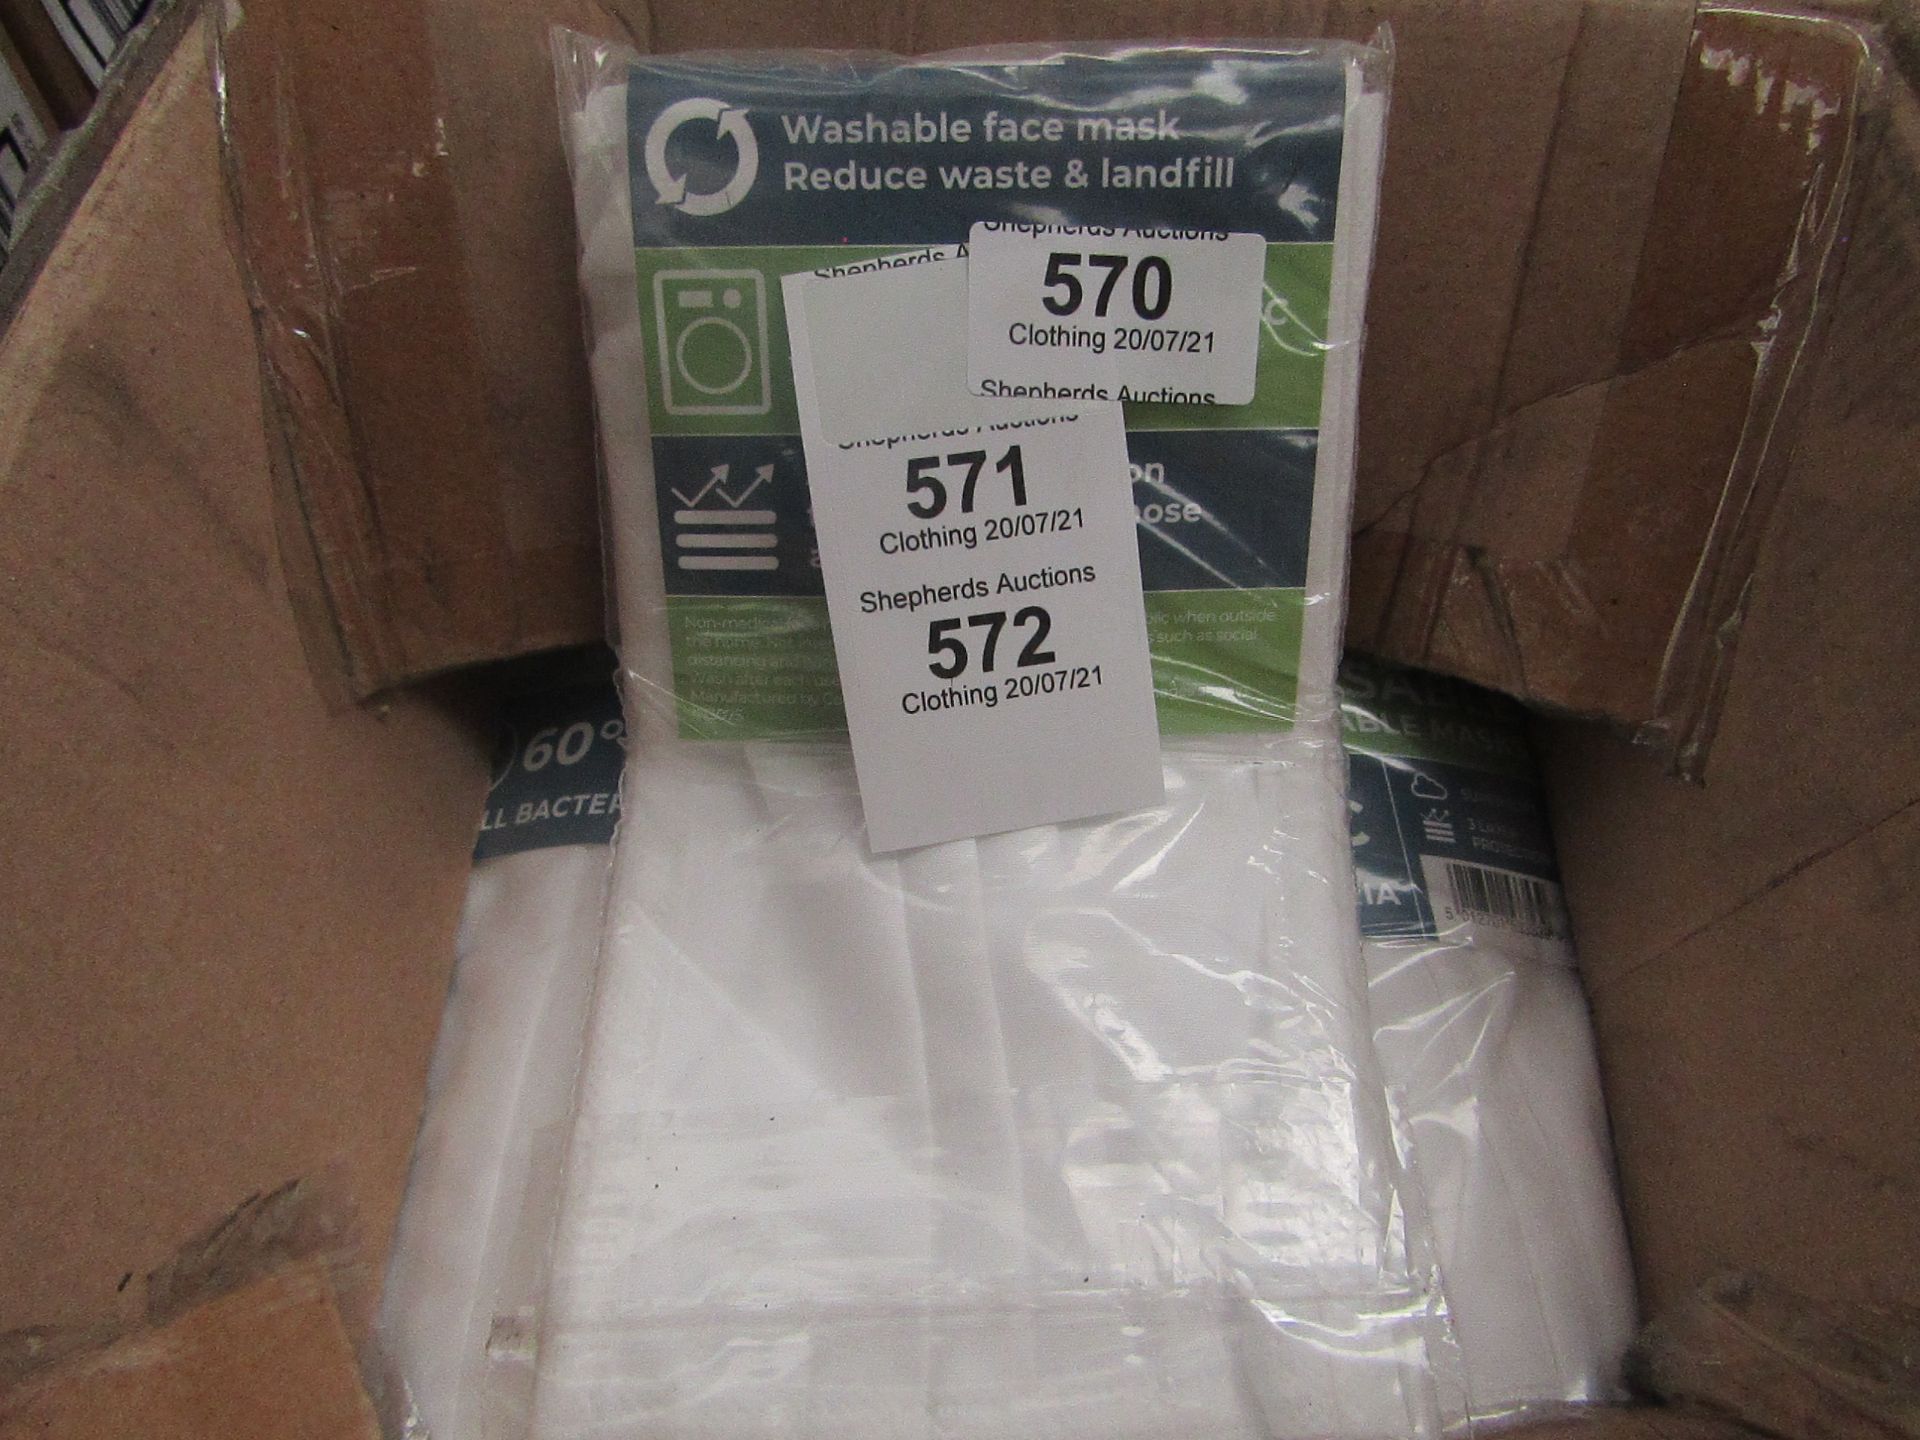 50 x Pack's of 5 Reusable Washable Face Masks (250 in total) - New & Packaged.